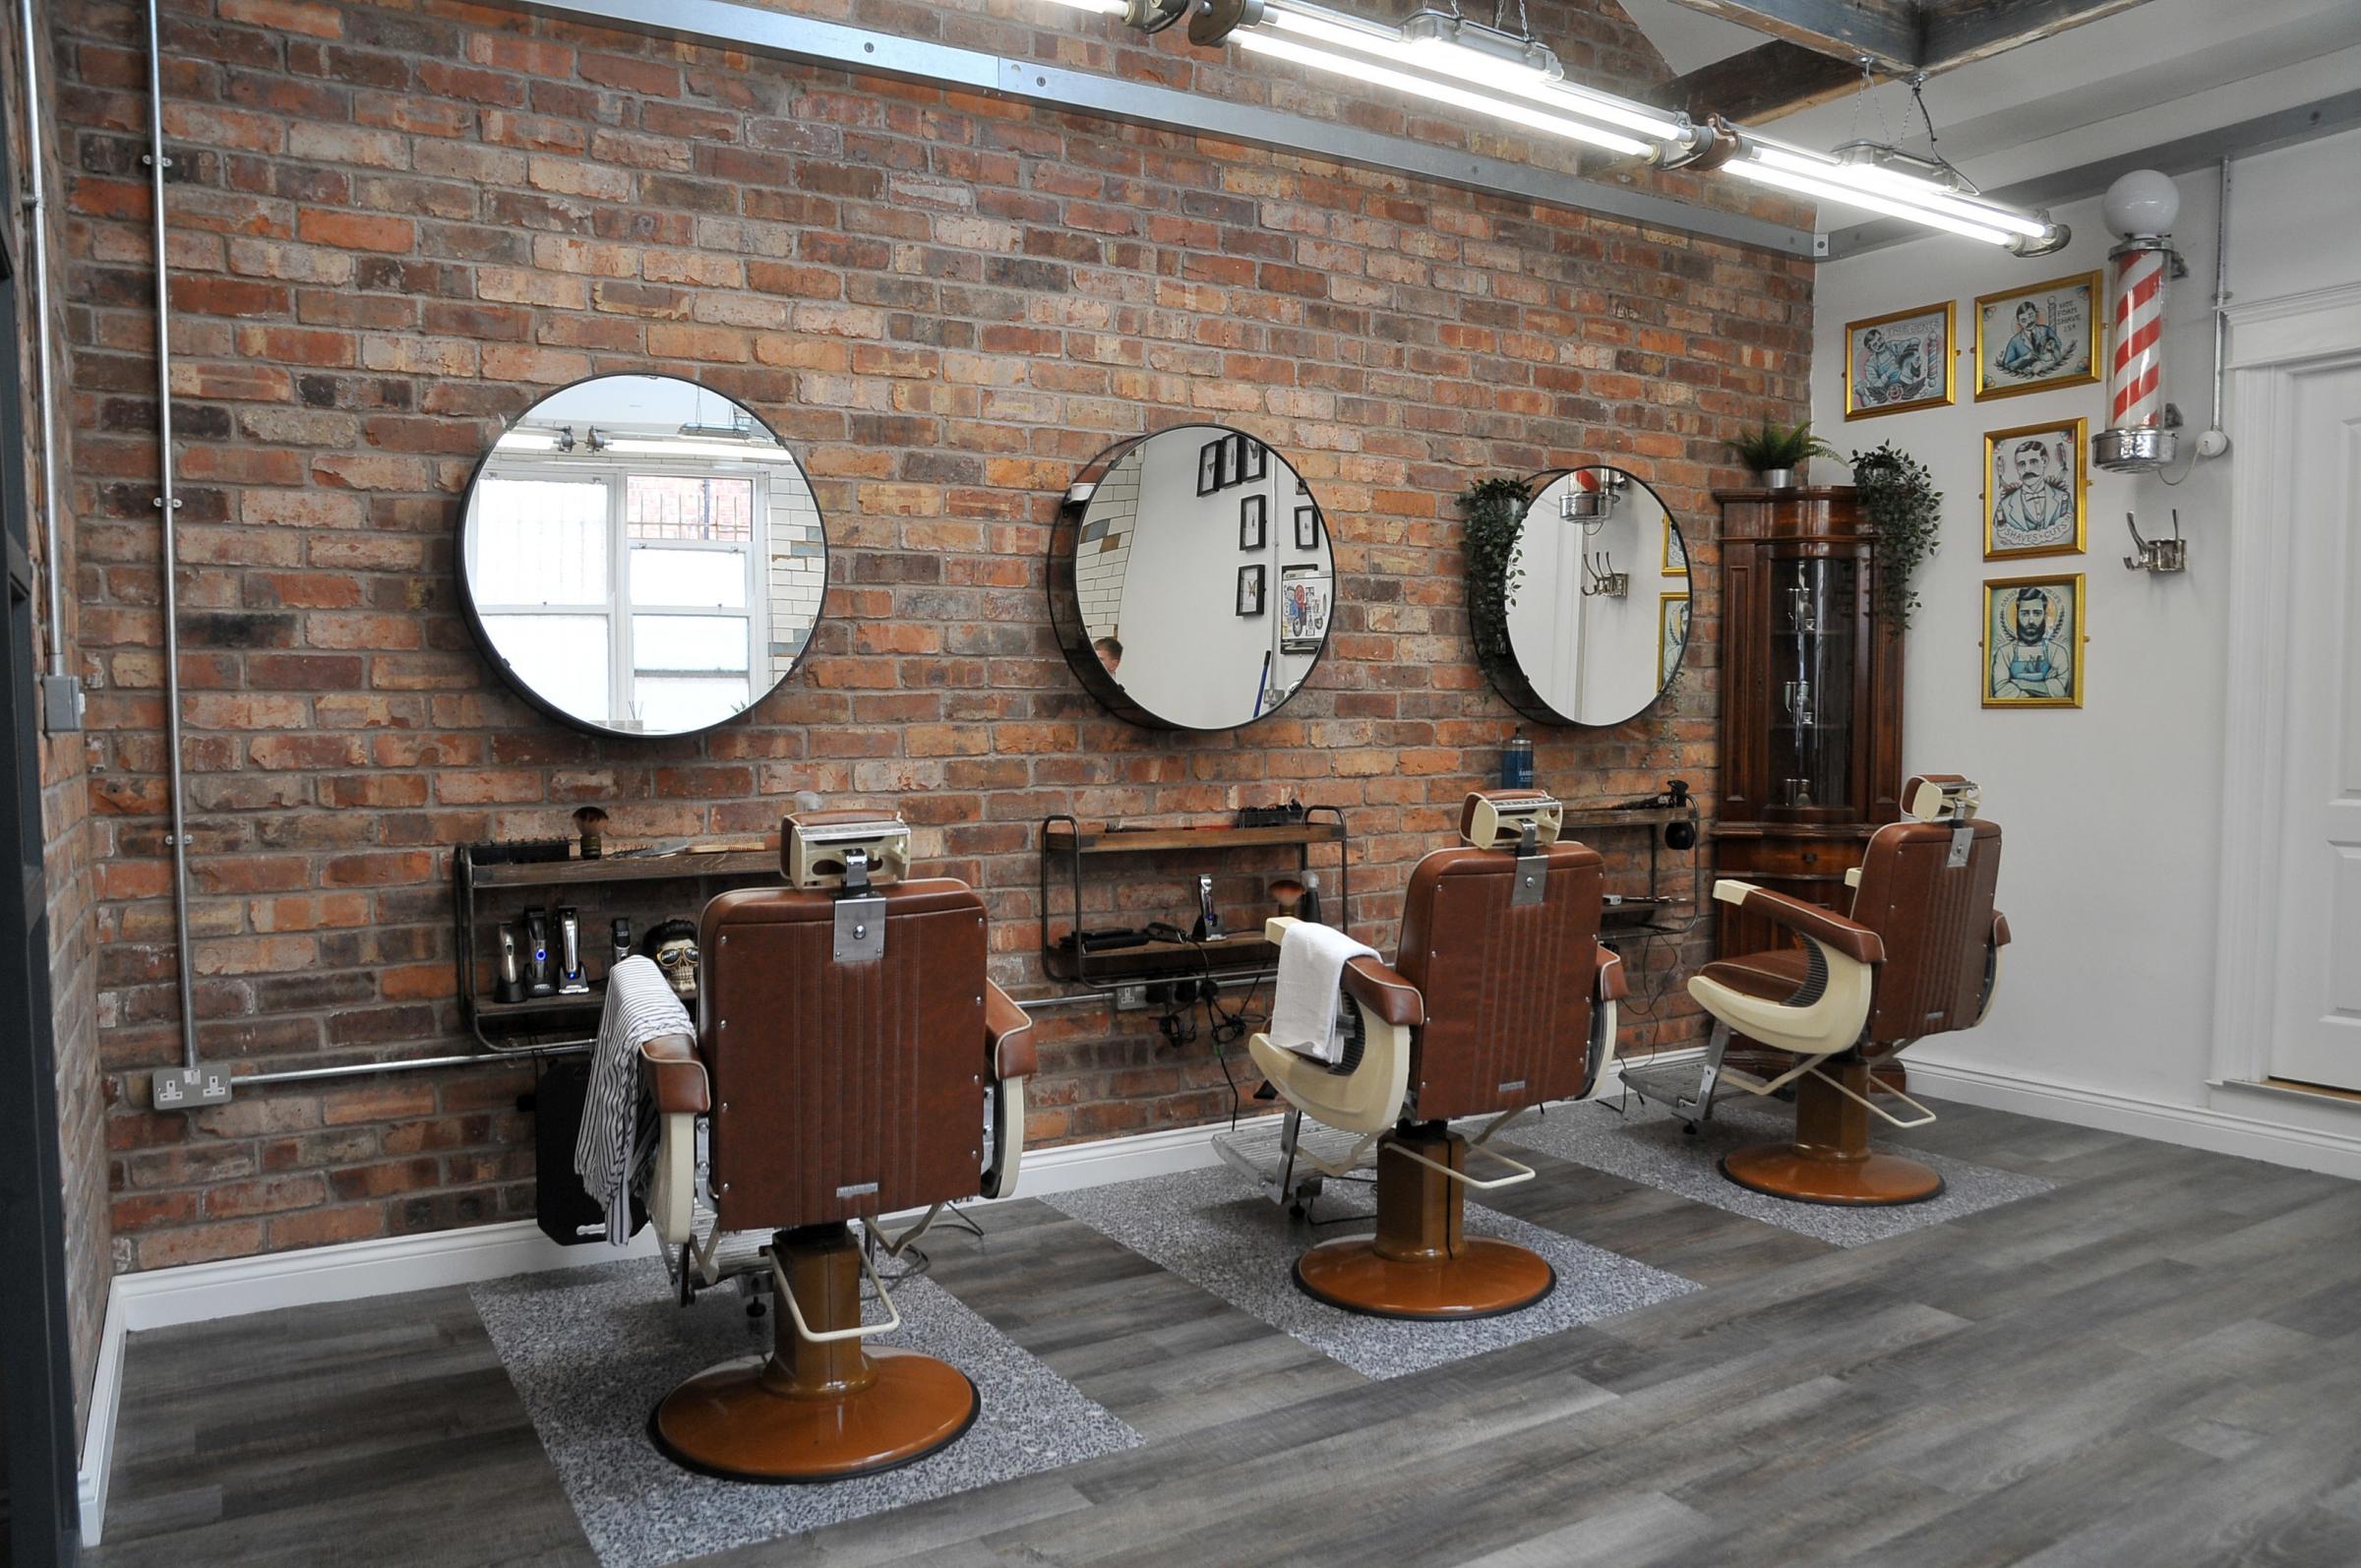 The three barber chairs